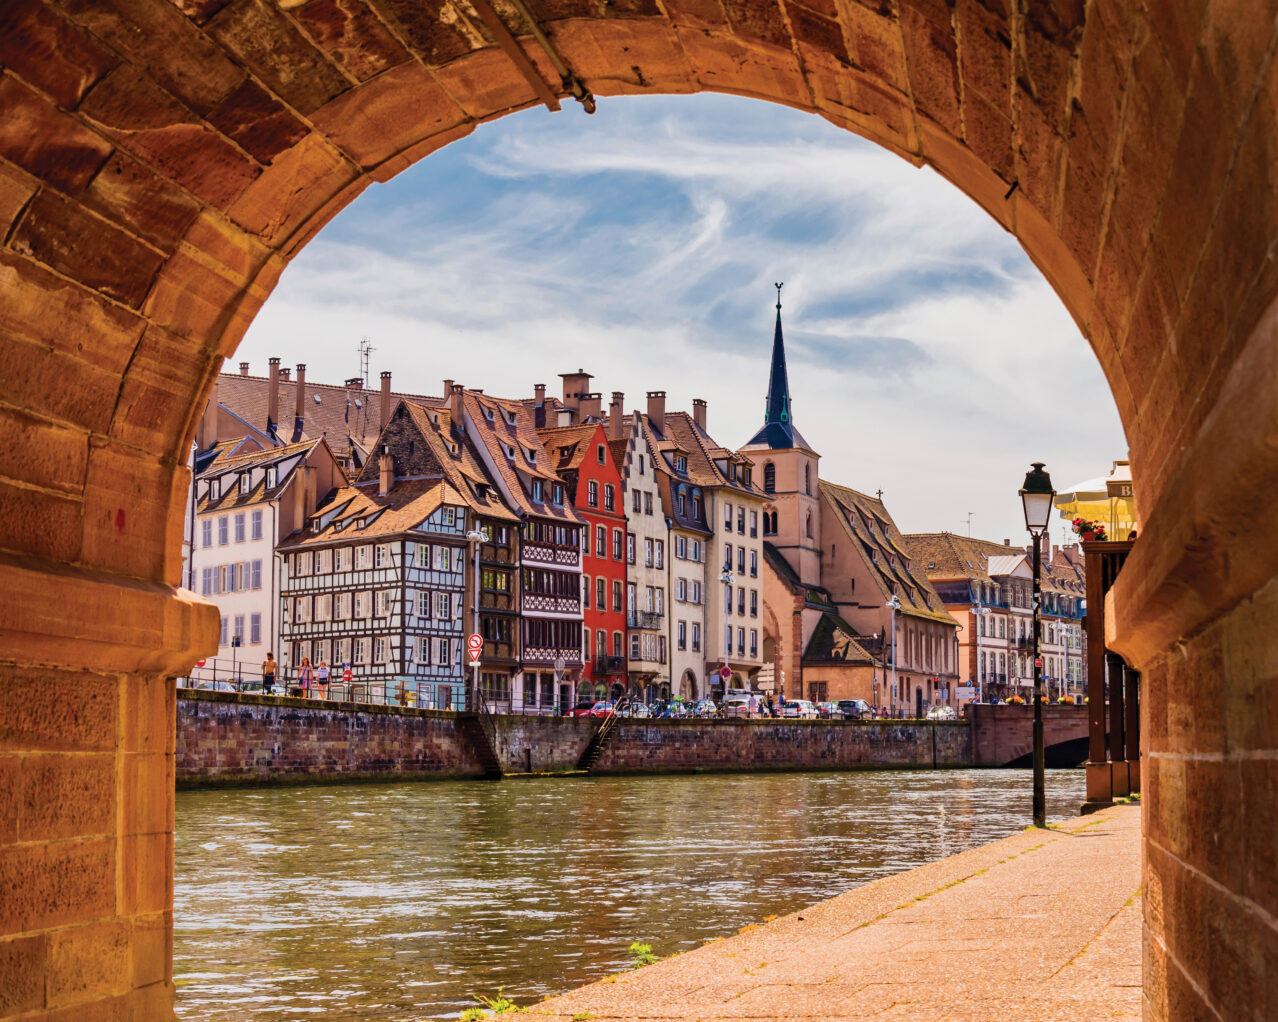 A view of Strasbourg through a tunnel